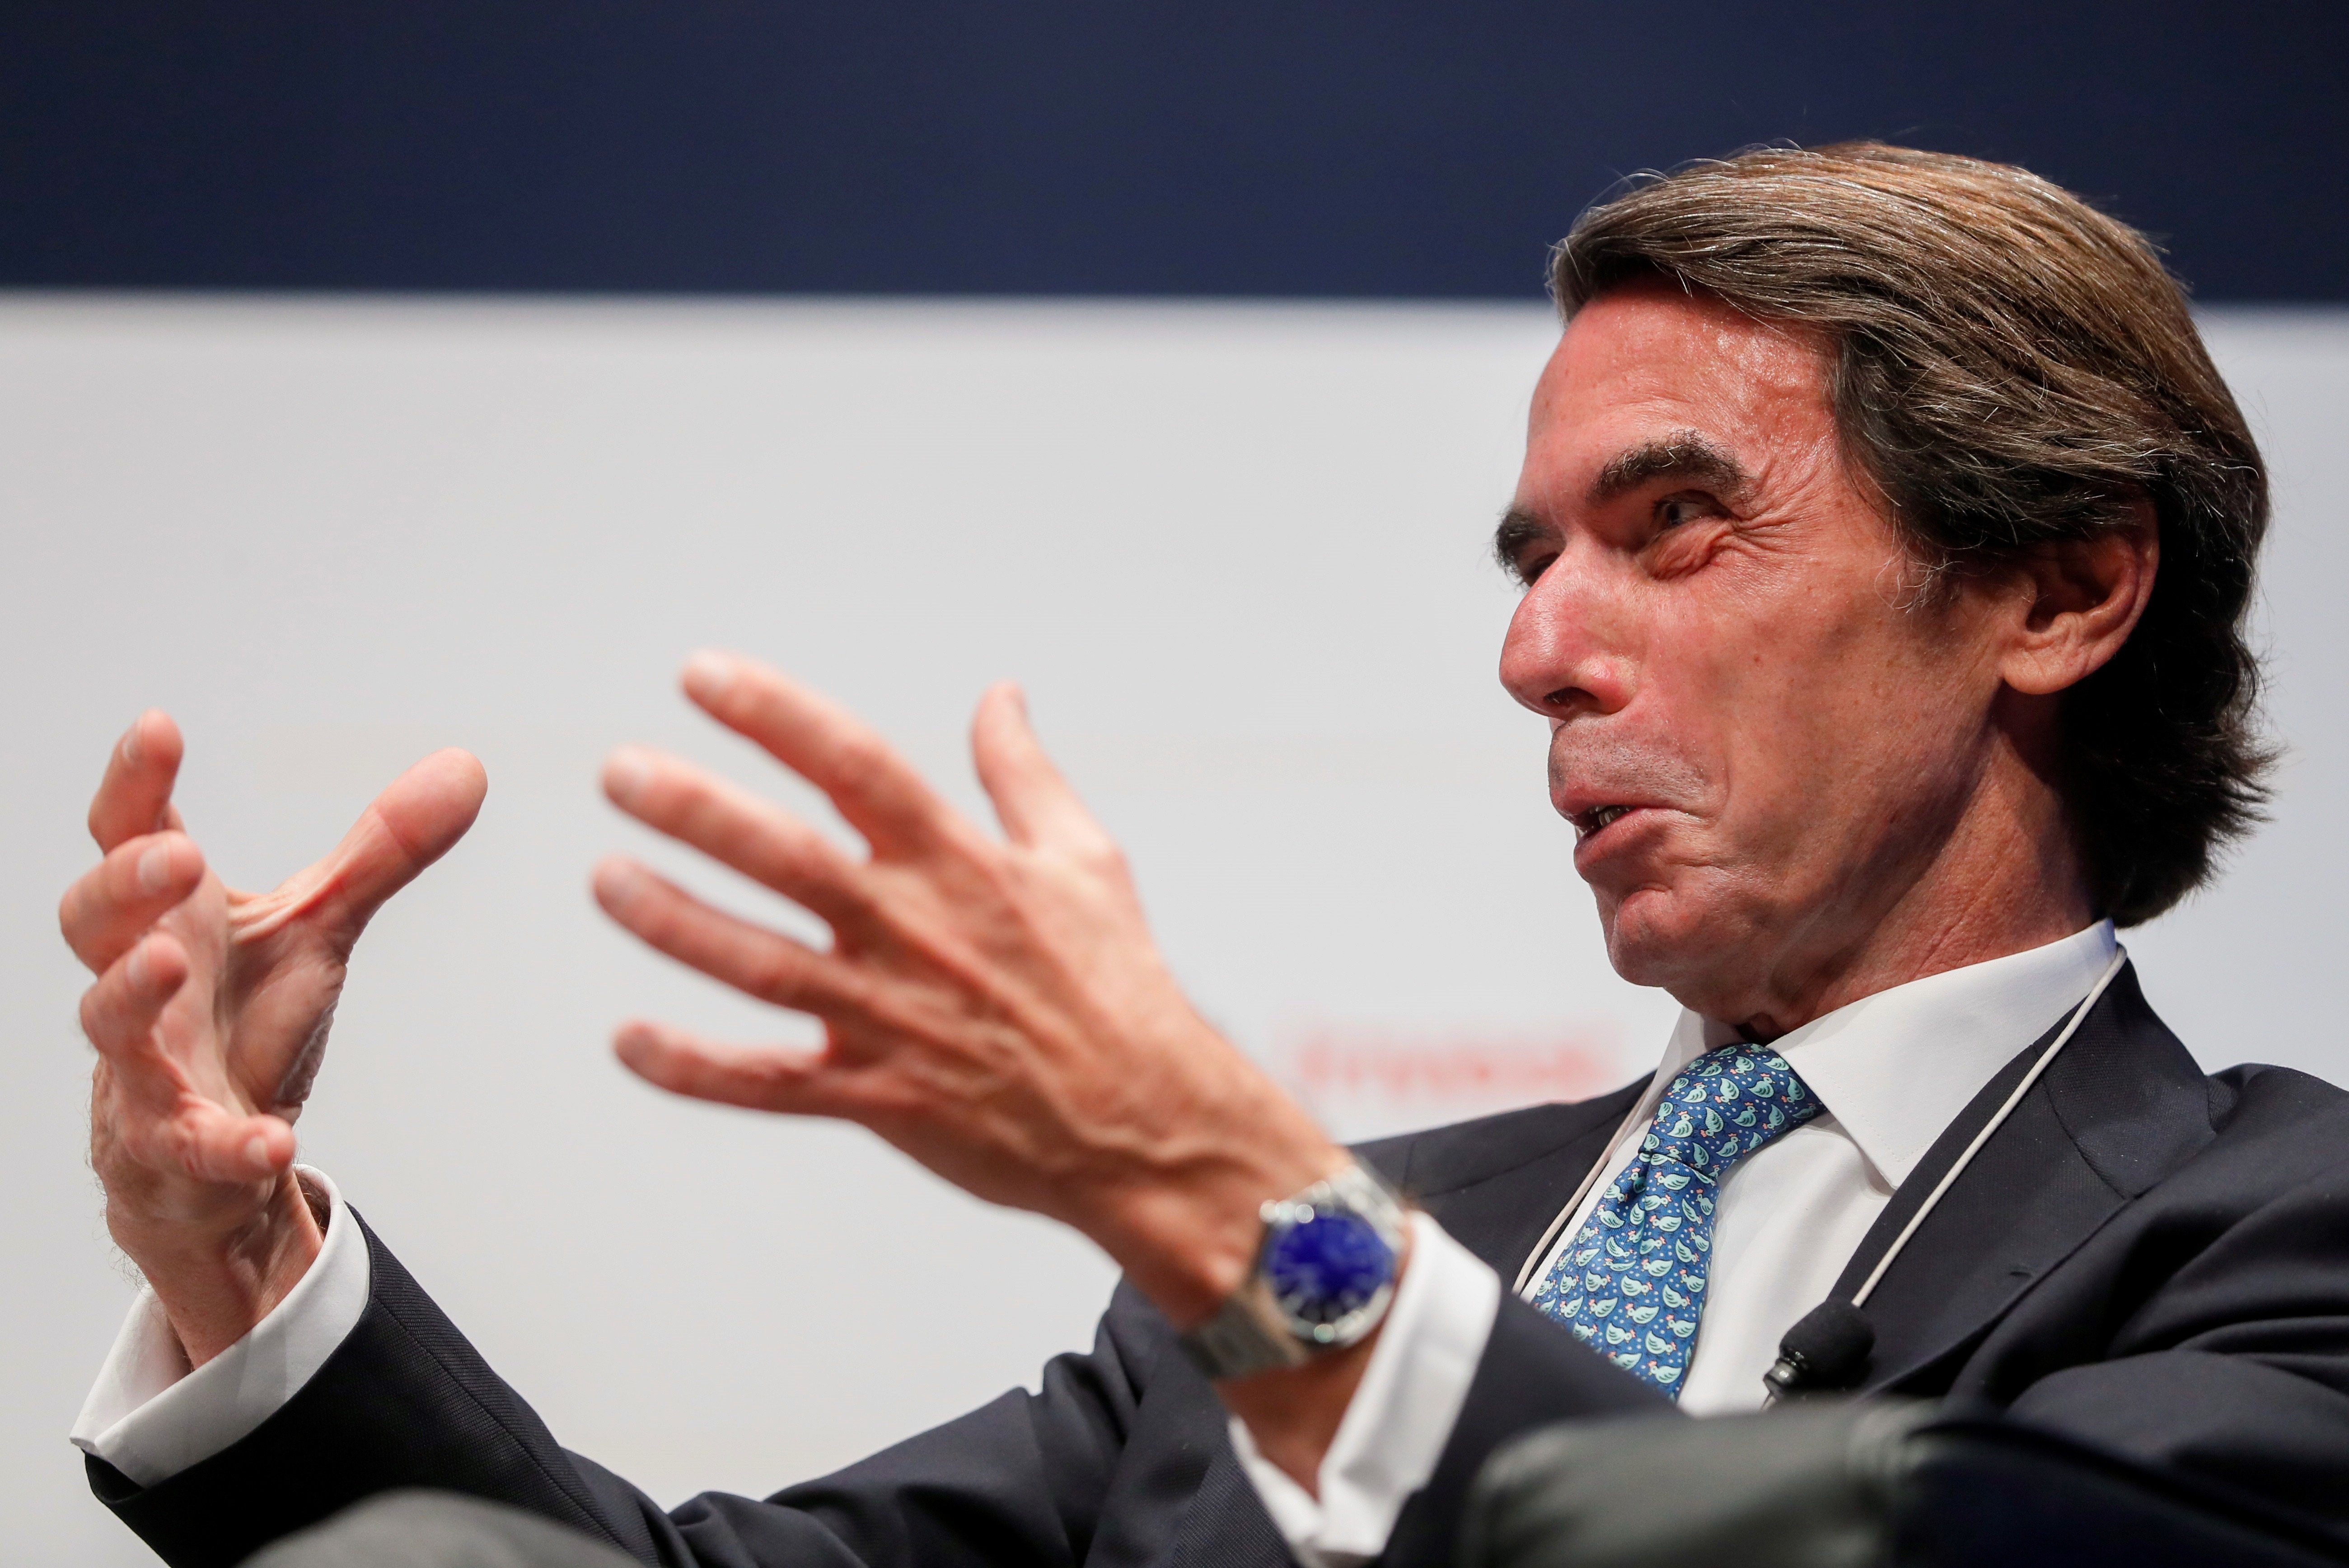 Aznar's warning: "Those who try to destroy the unity of Spain have to pay for it"